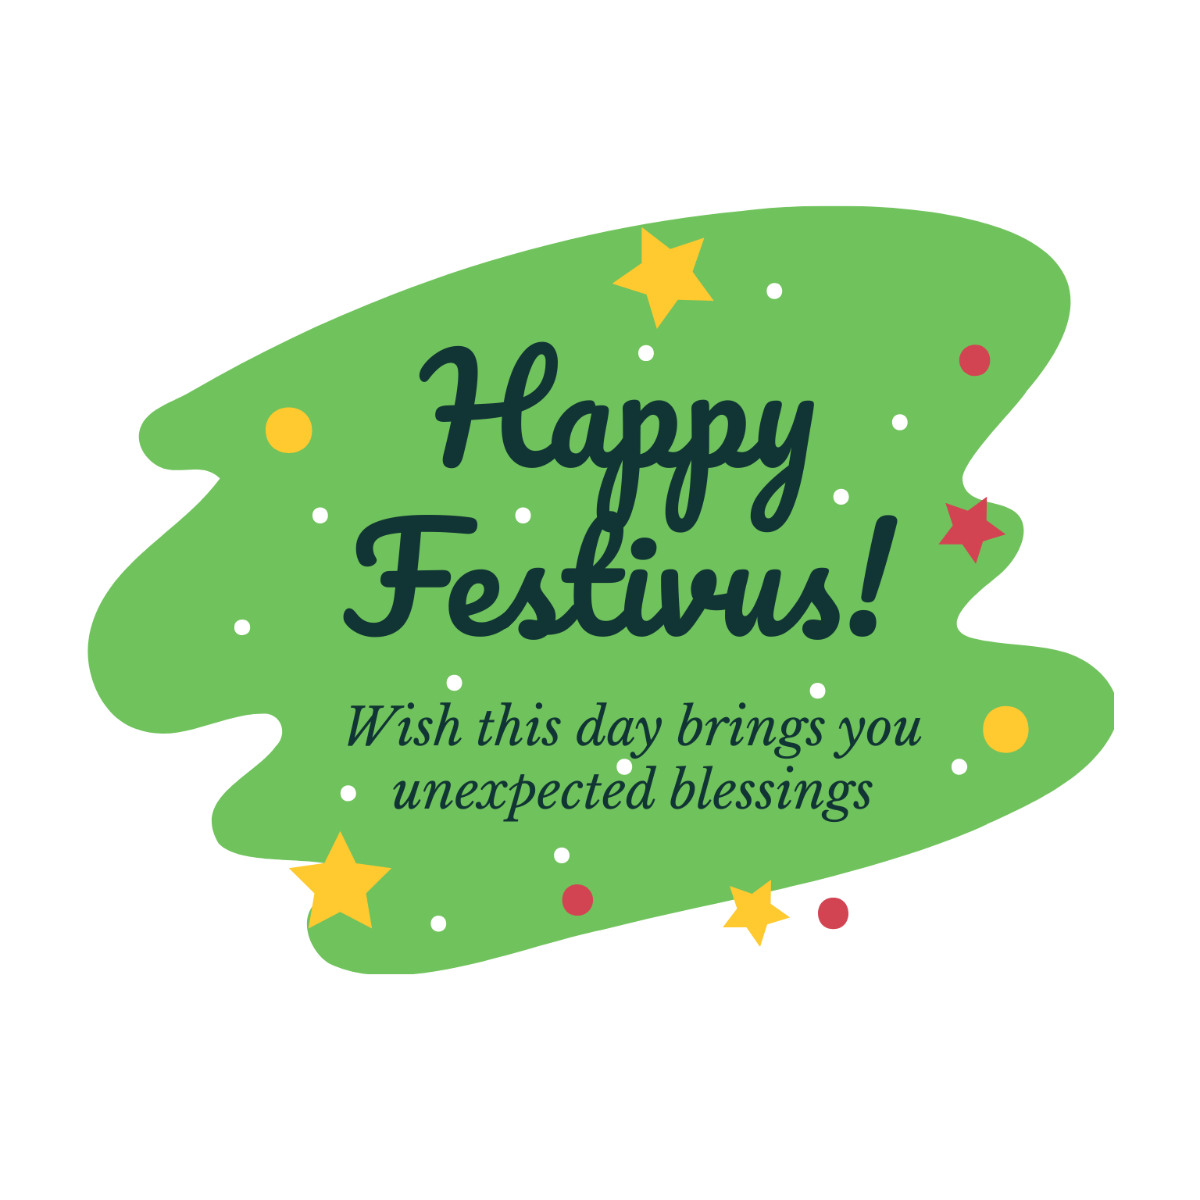 Festivus Wishes Vector Template